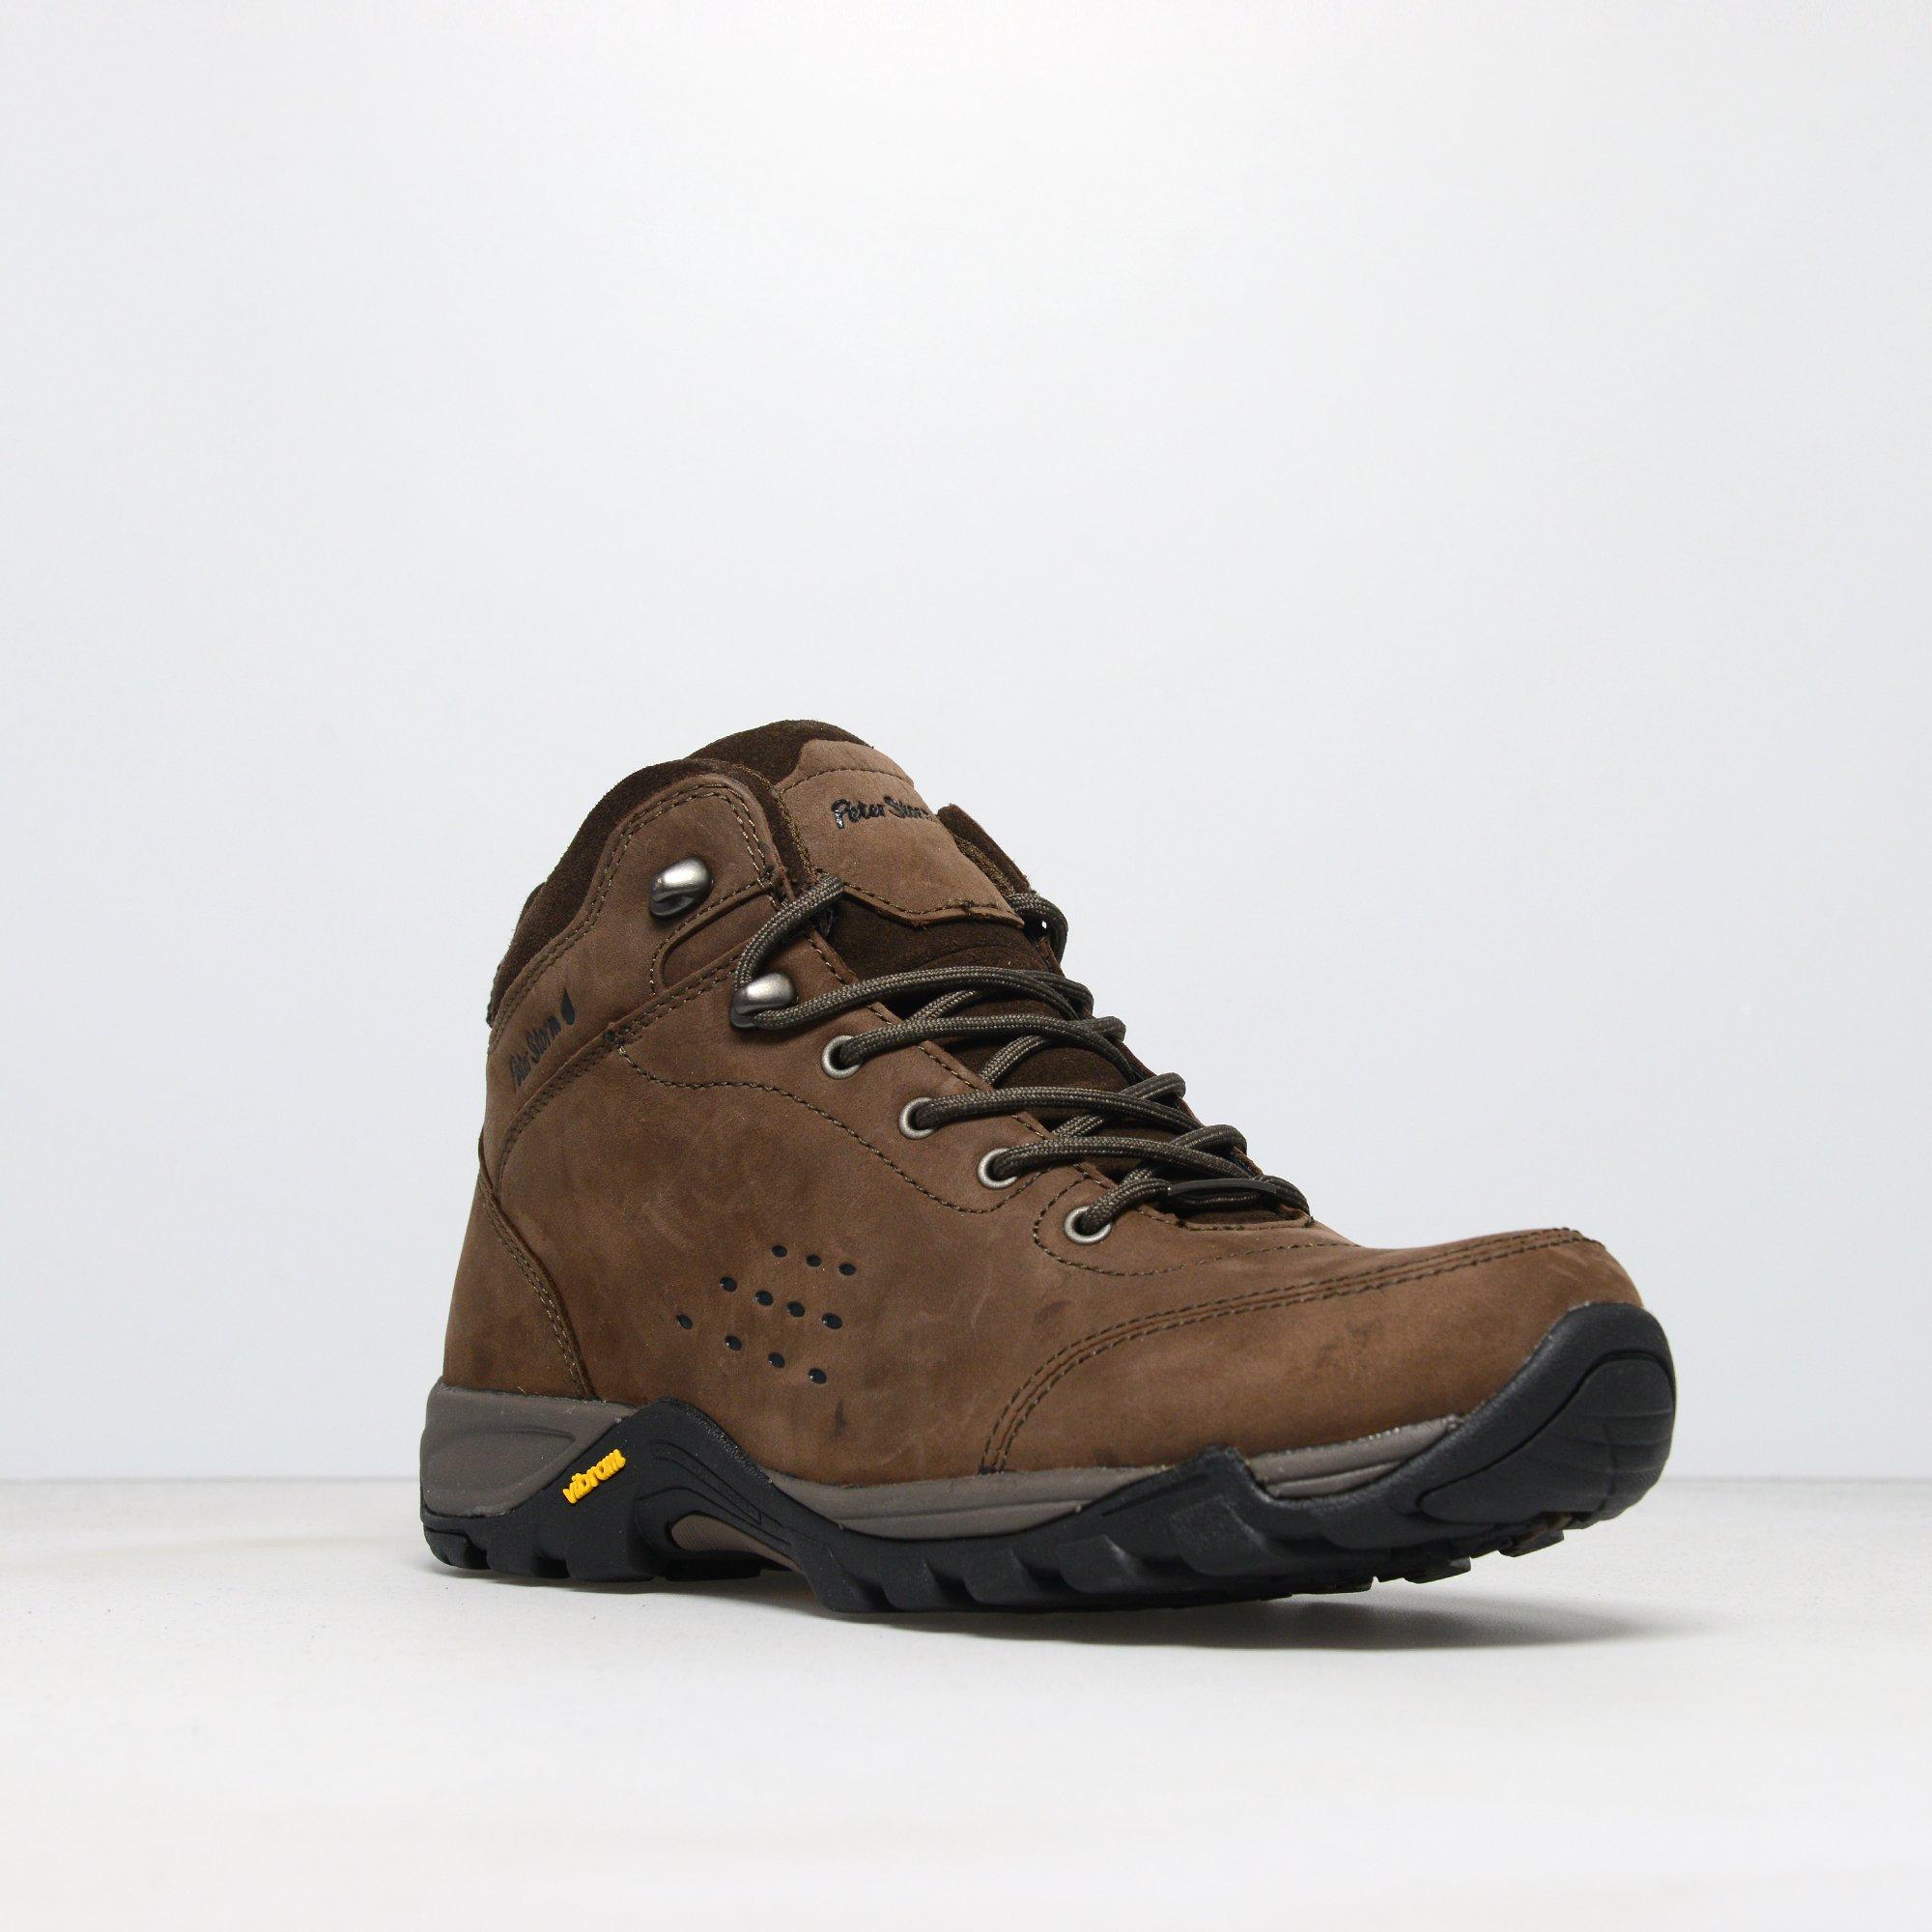 peter storm grizedale boots